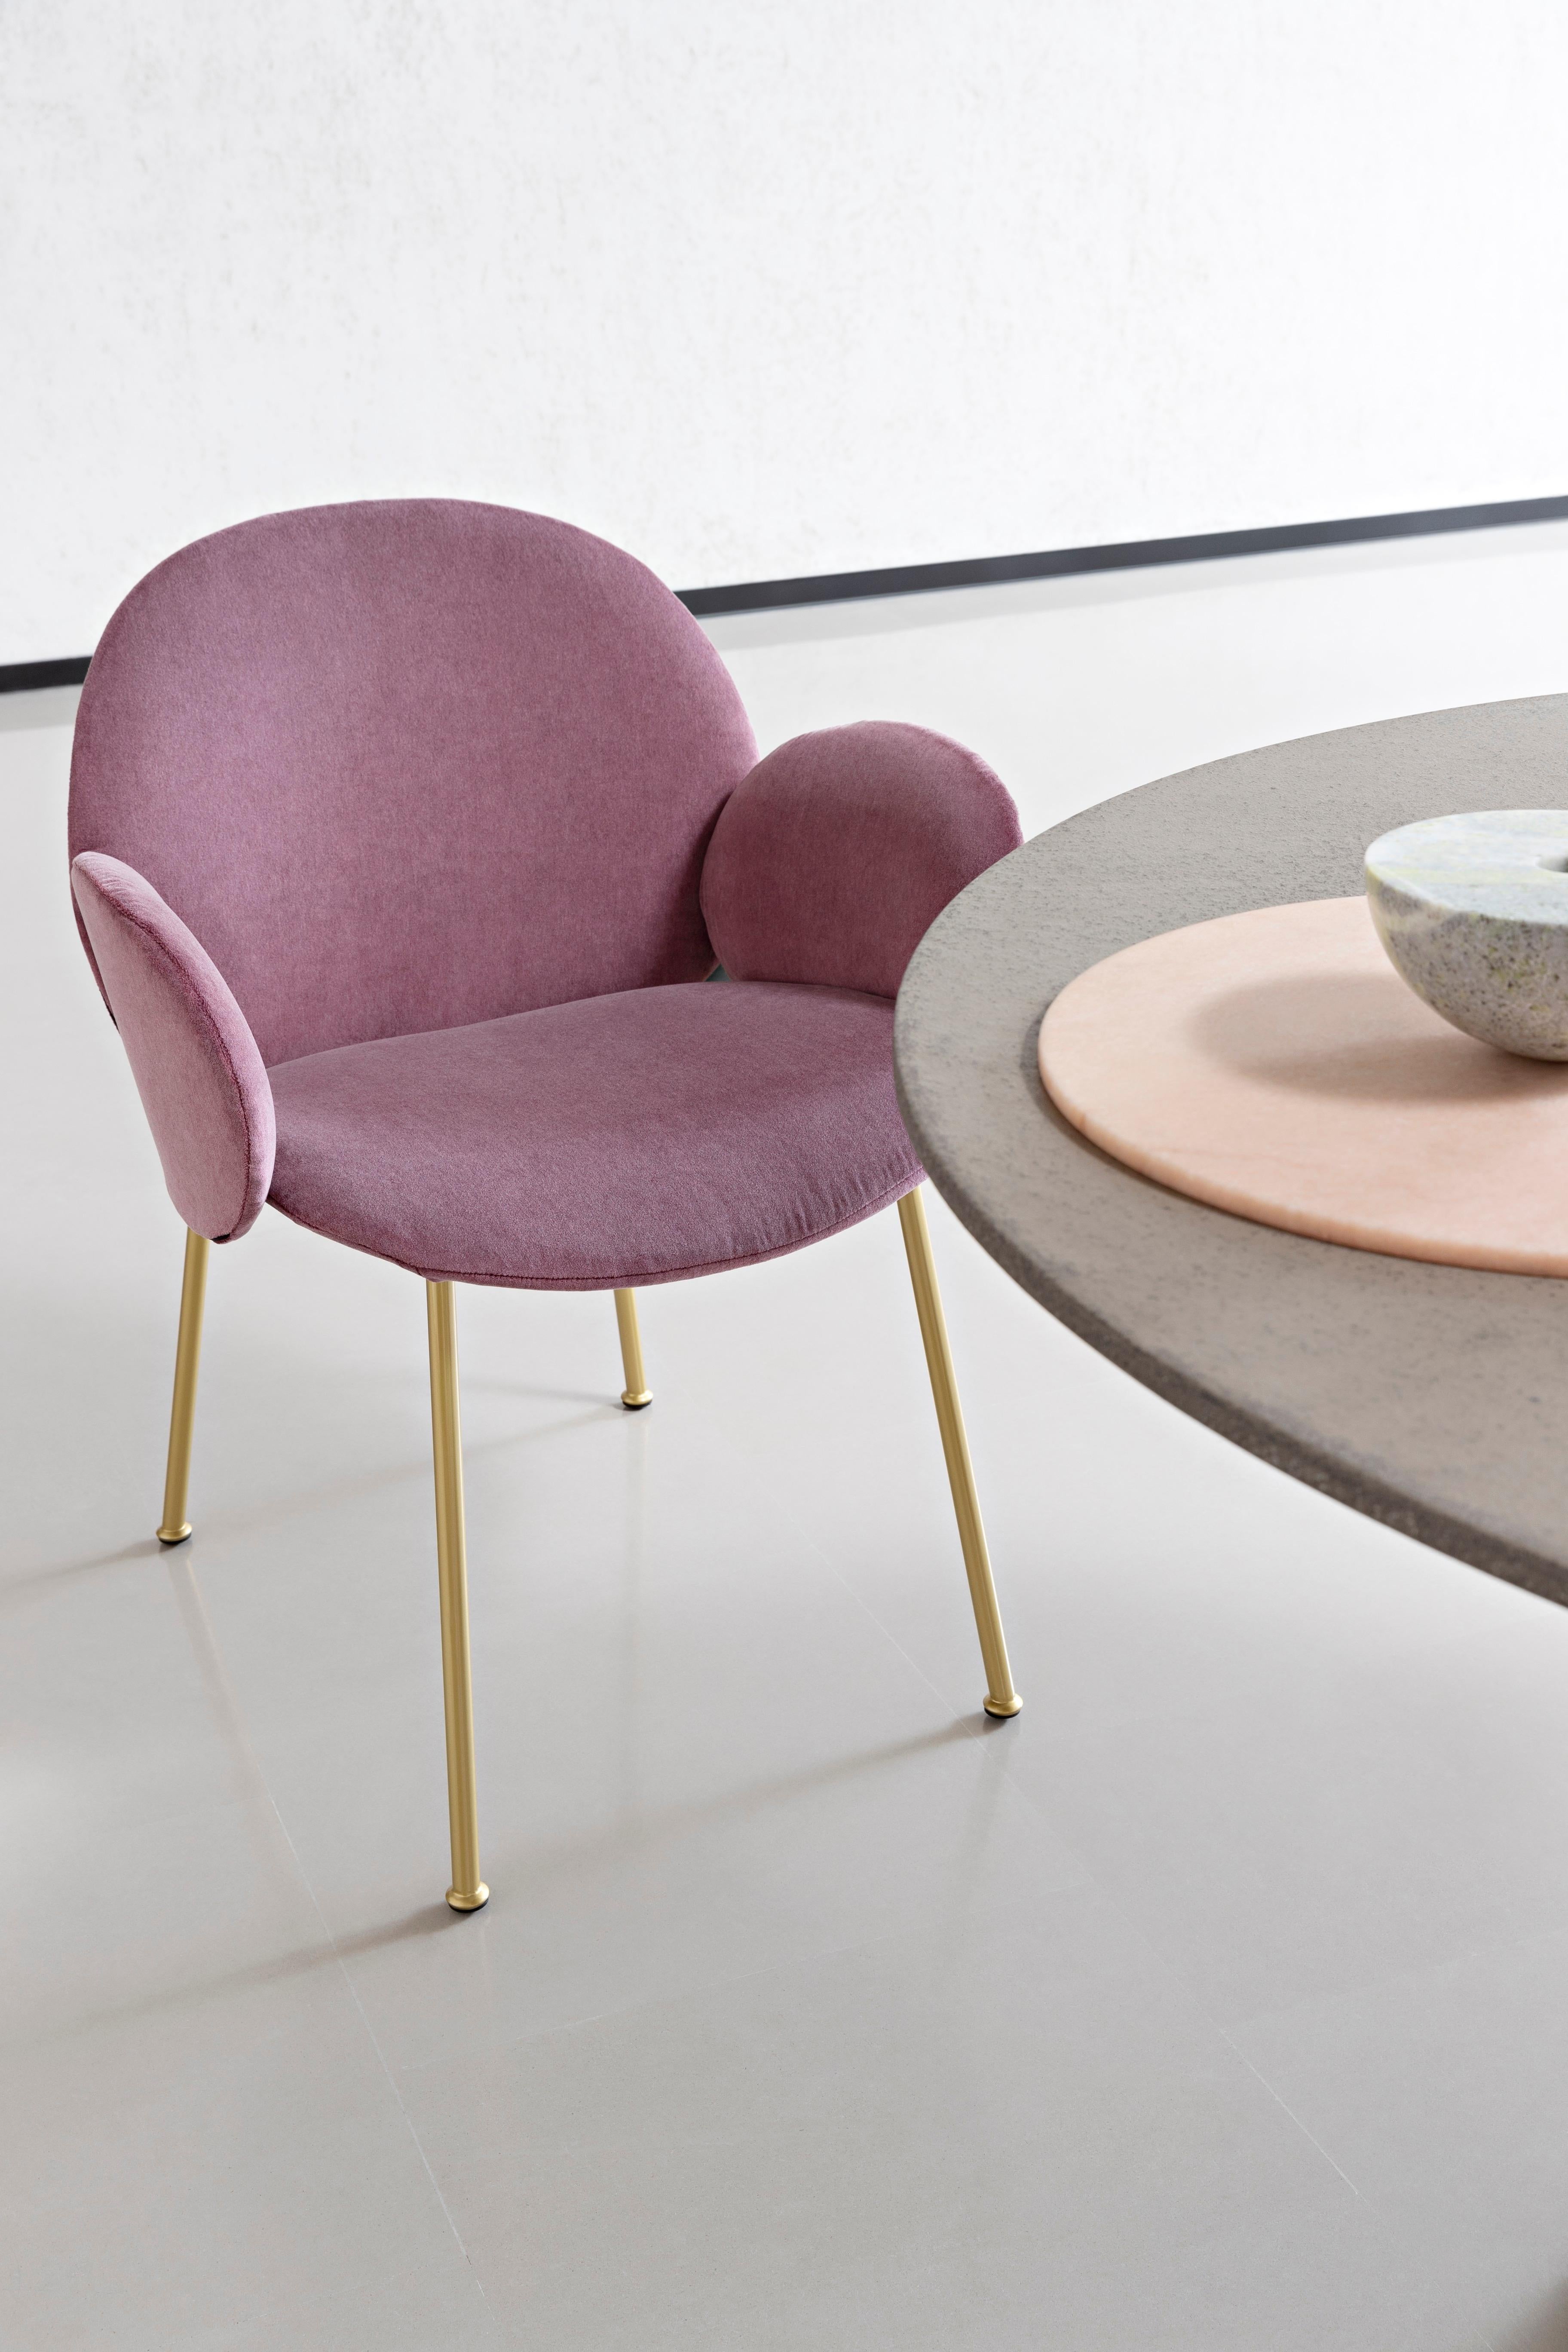 Modern Ola Chair in Violet 19 Beige Upholstery with Satin Brass Legs by Saba For Sale